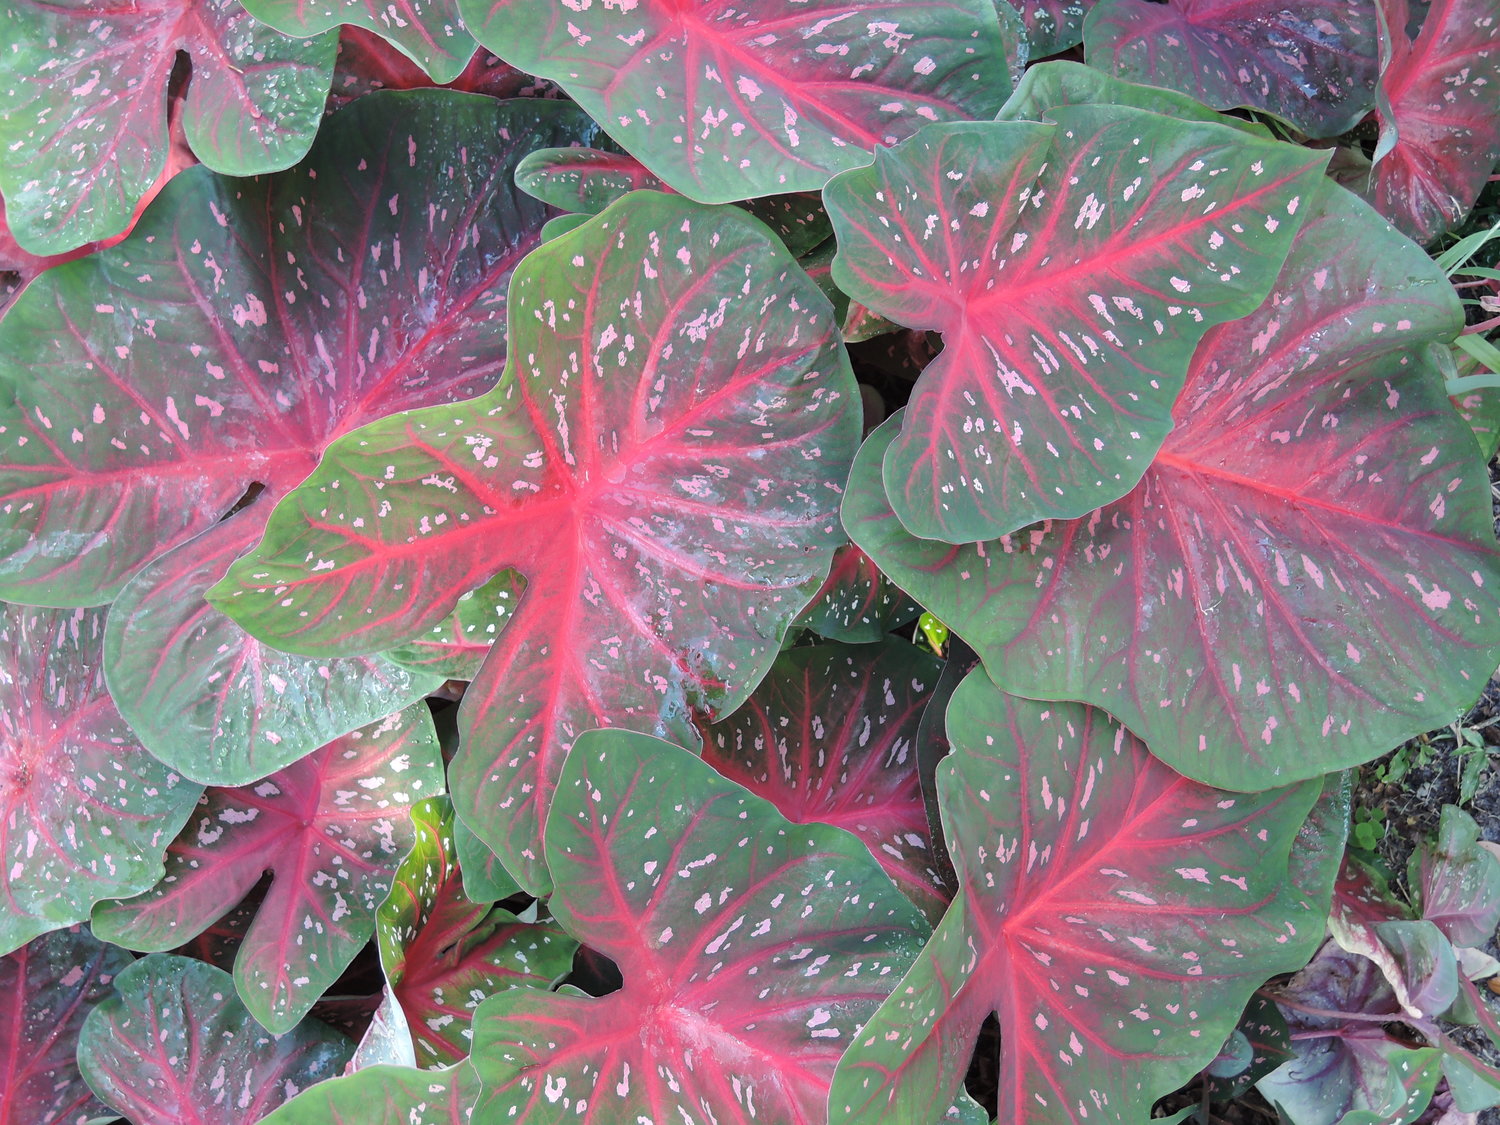 Most caladiums come in variations of green, pink, red and white.